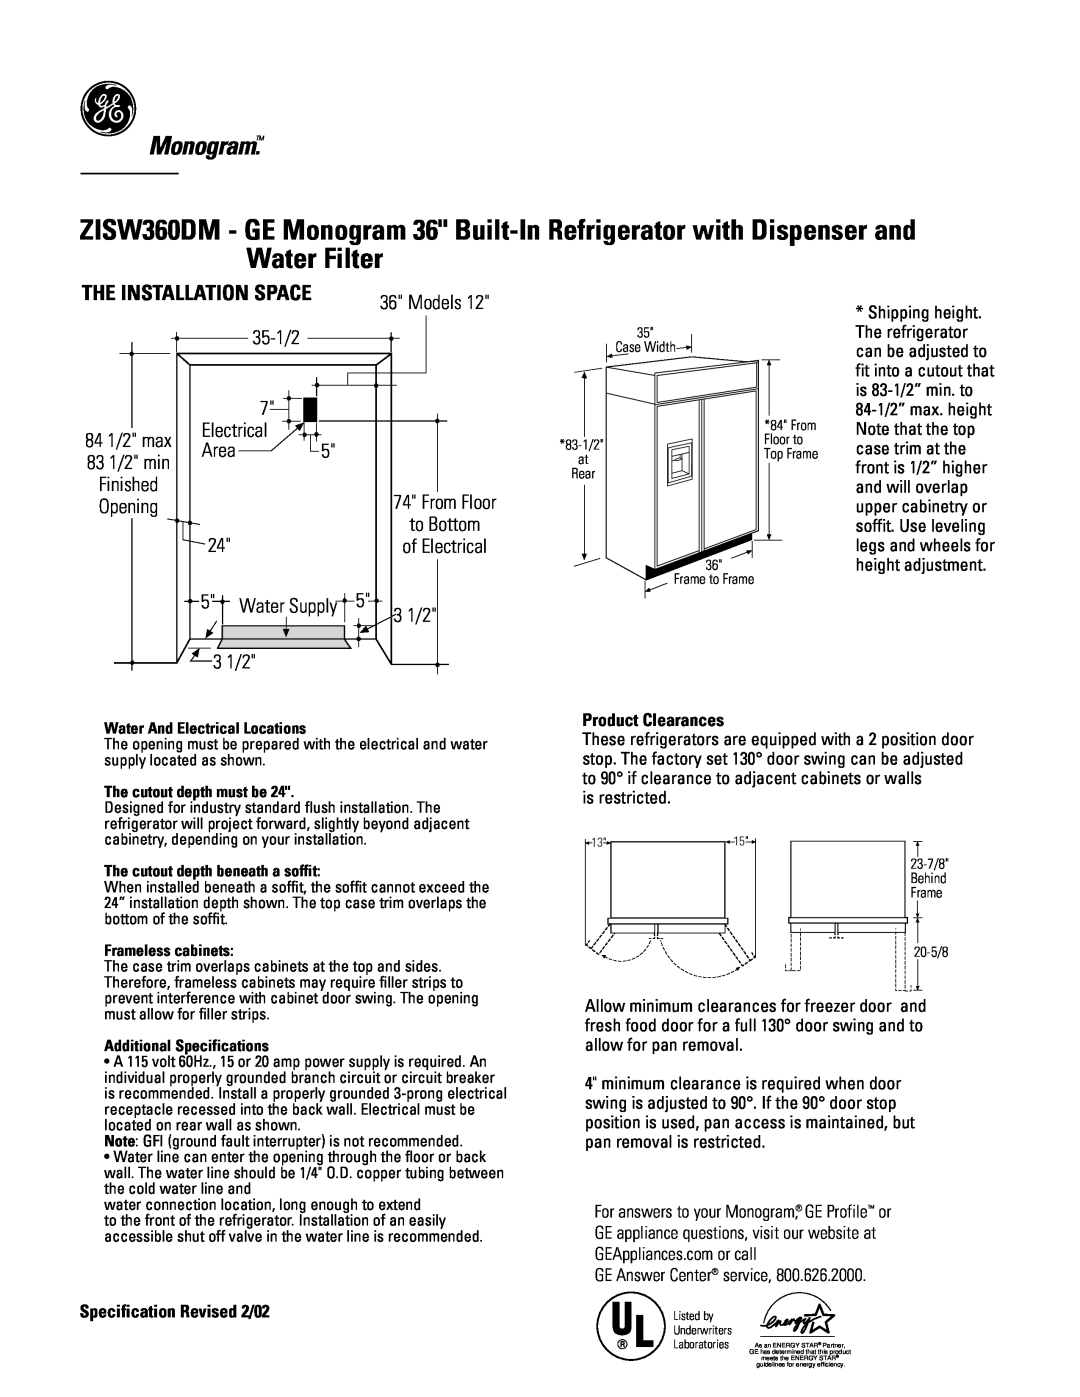 GE Monogram ZISW360DM specifications Monogram, The Installation Space, Product Clearances, Specification Revised 2/02 